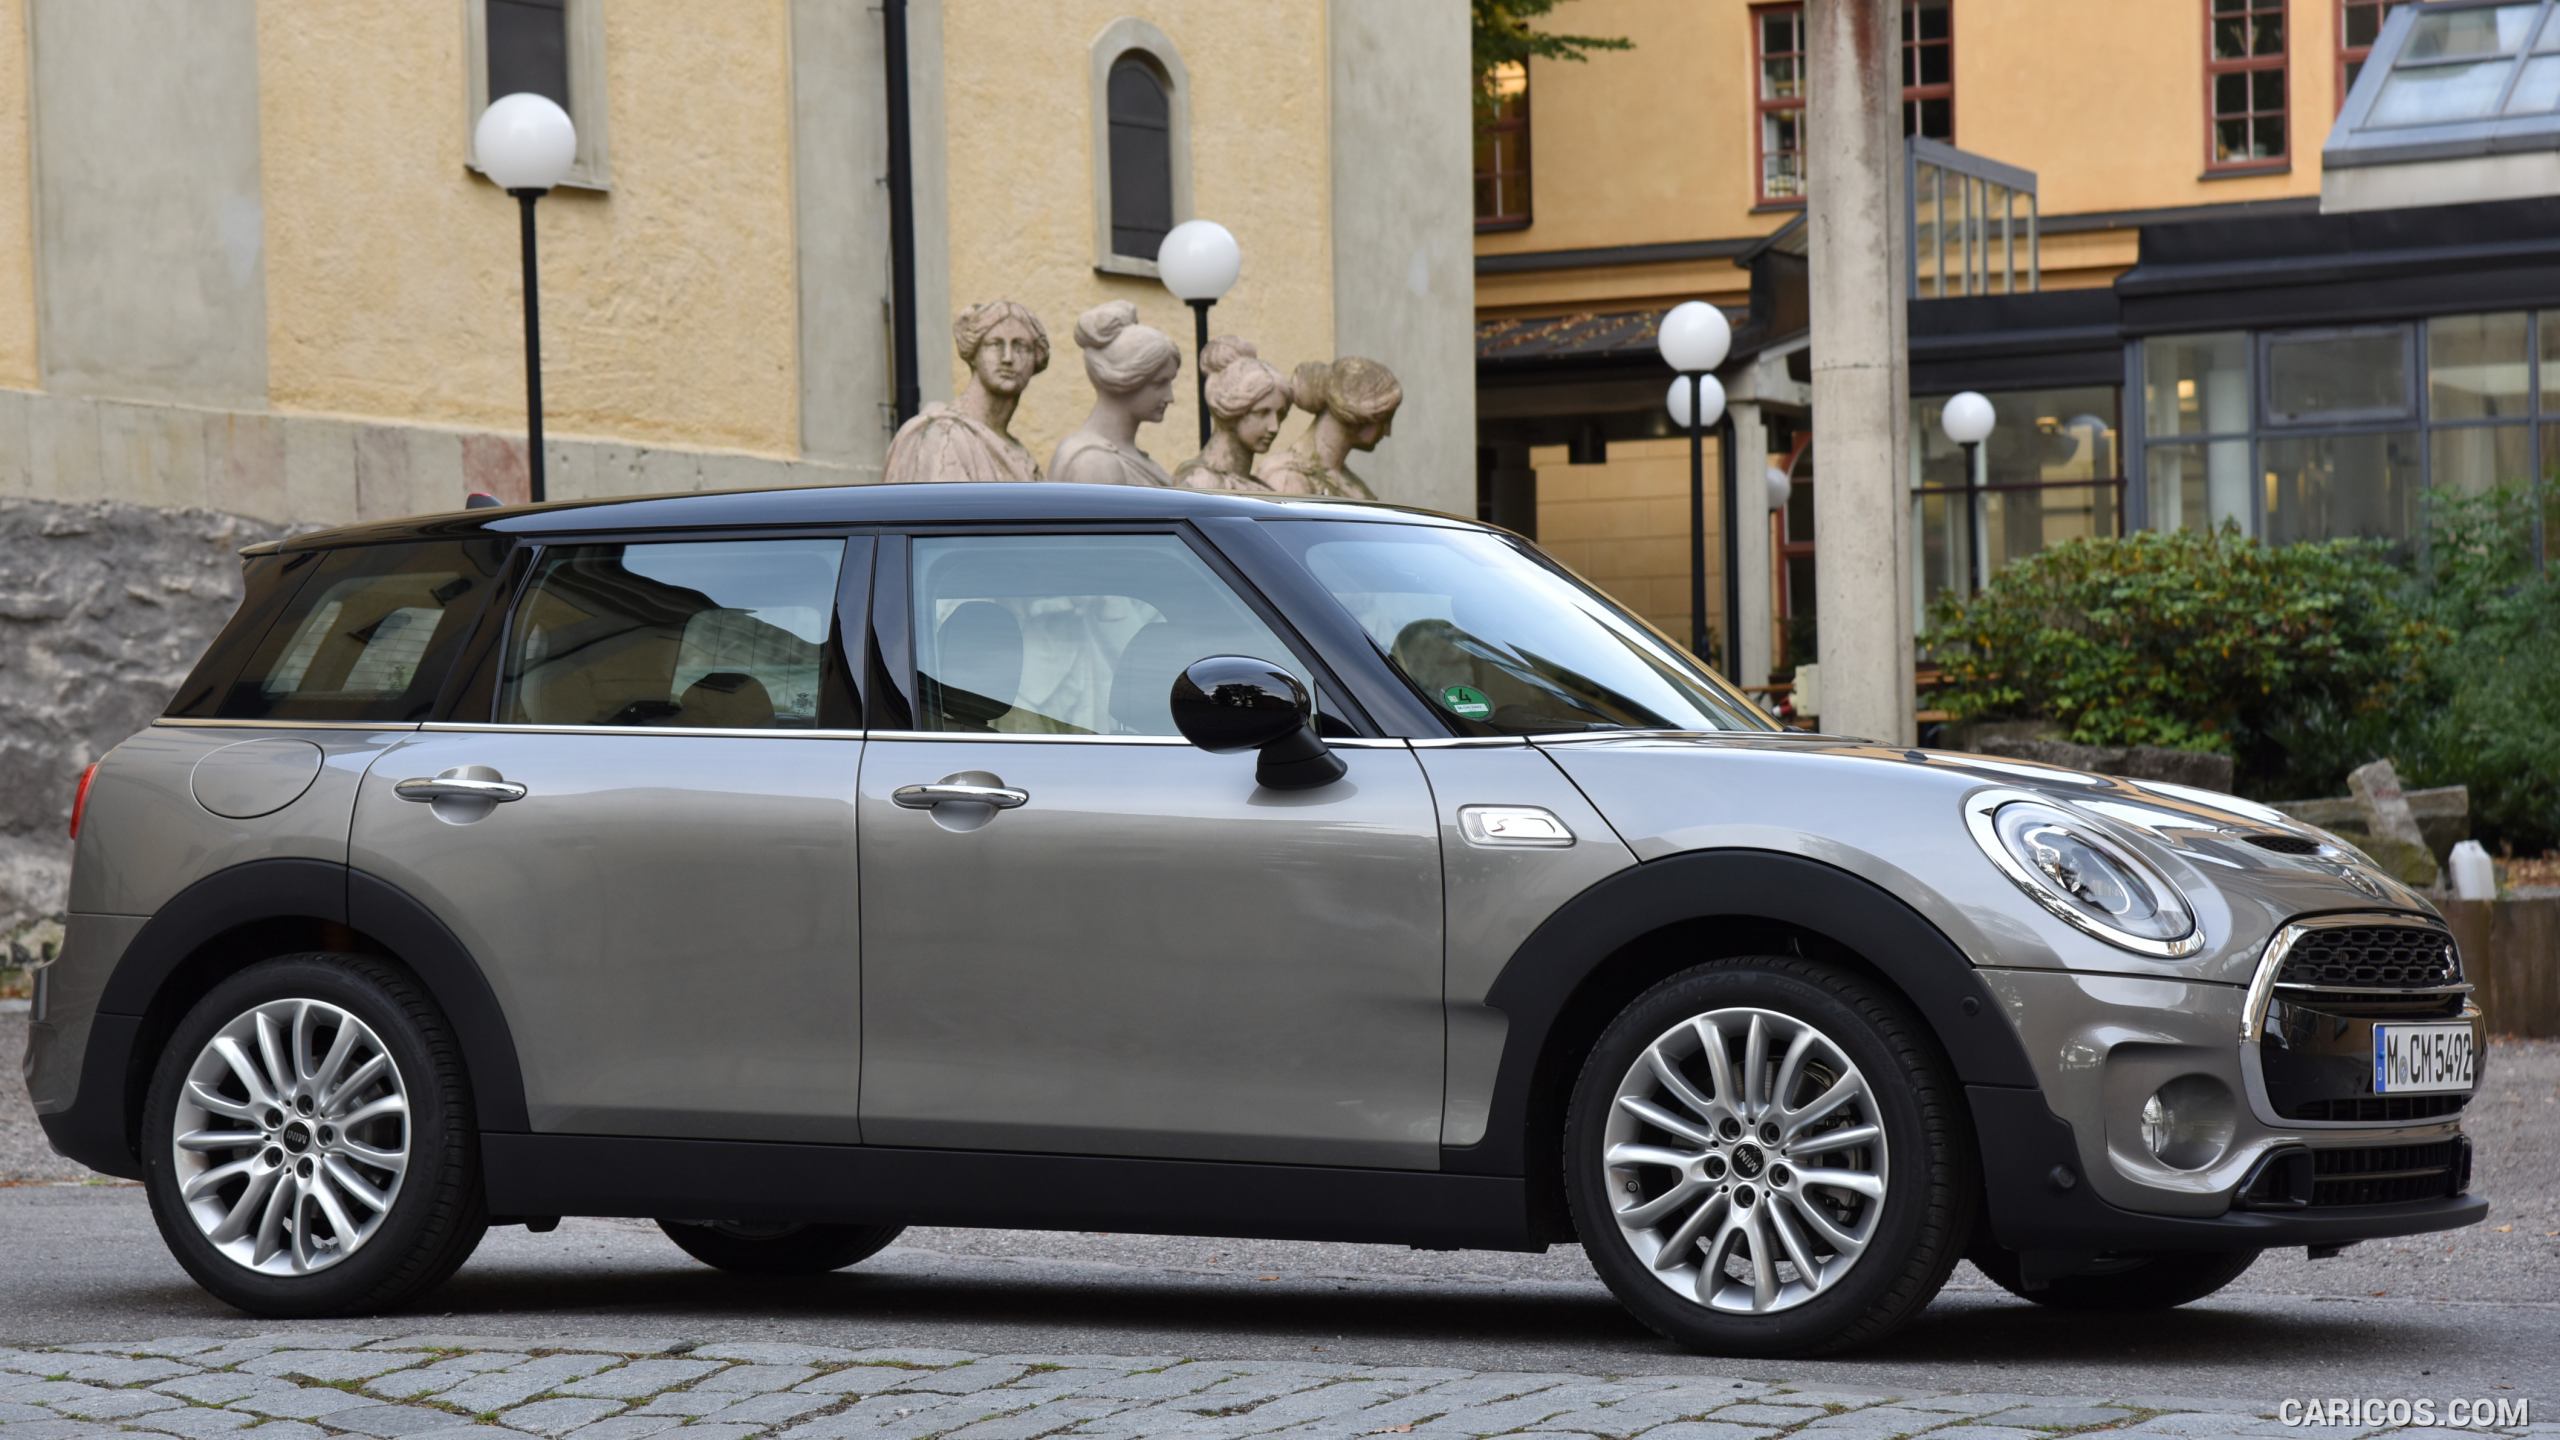 2016 MINI Cooper S Clubman in Metallic Melting Silver - Side, #174 of 380